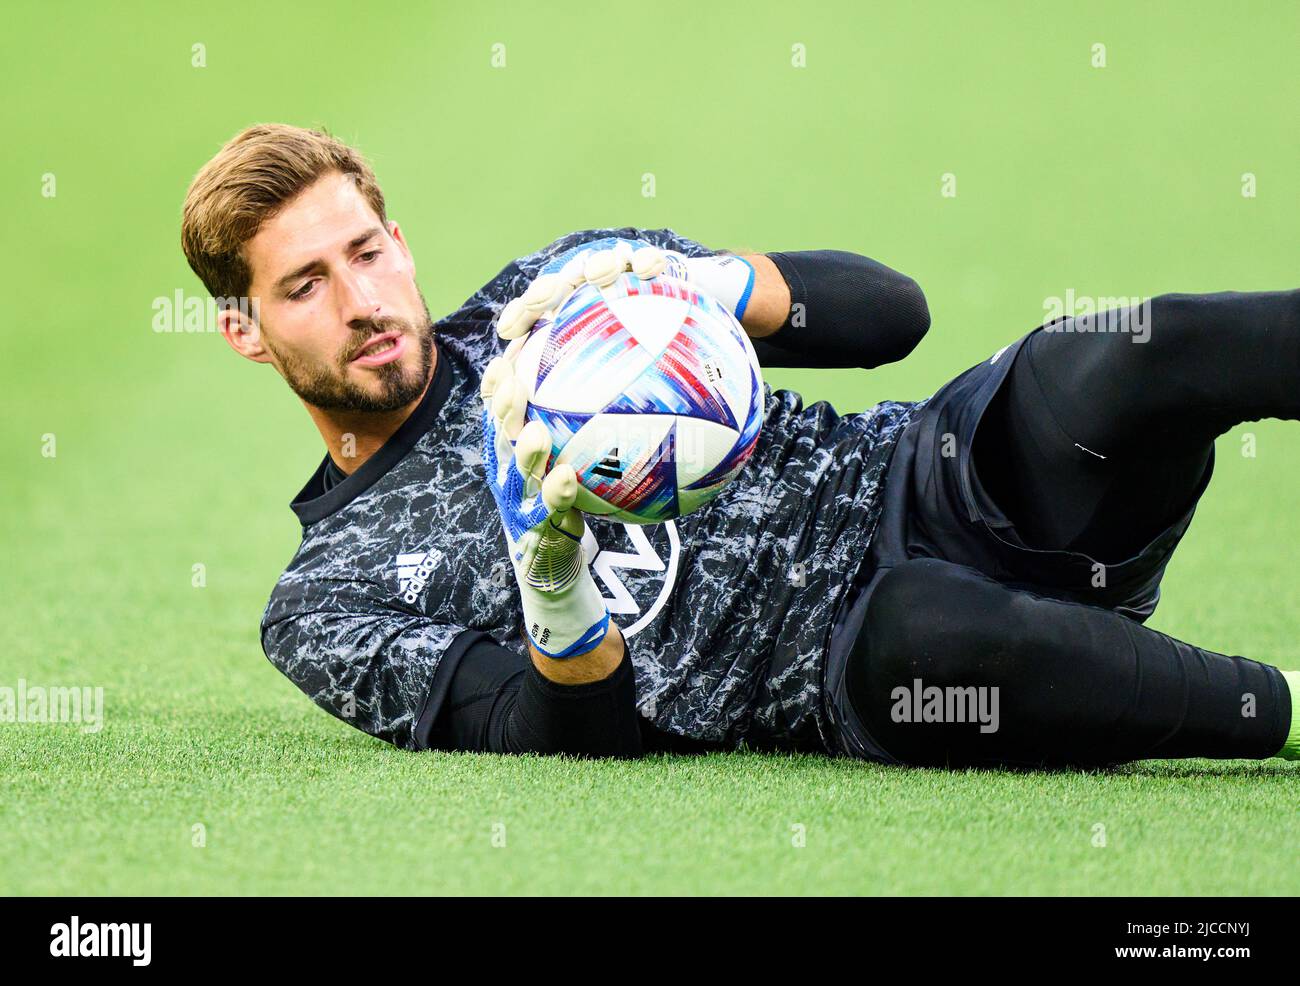 Kevin Trapp, DFB 12,  in the UEFA Nations League 2022 match HUNGARY - GERMANY 1-1  in Season 2022/2023 on Juni 11, 2022  in Budapest, Hungary.  © Peter Schatz / Alamy Live News Stock Photo